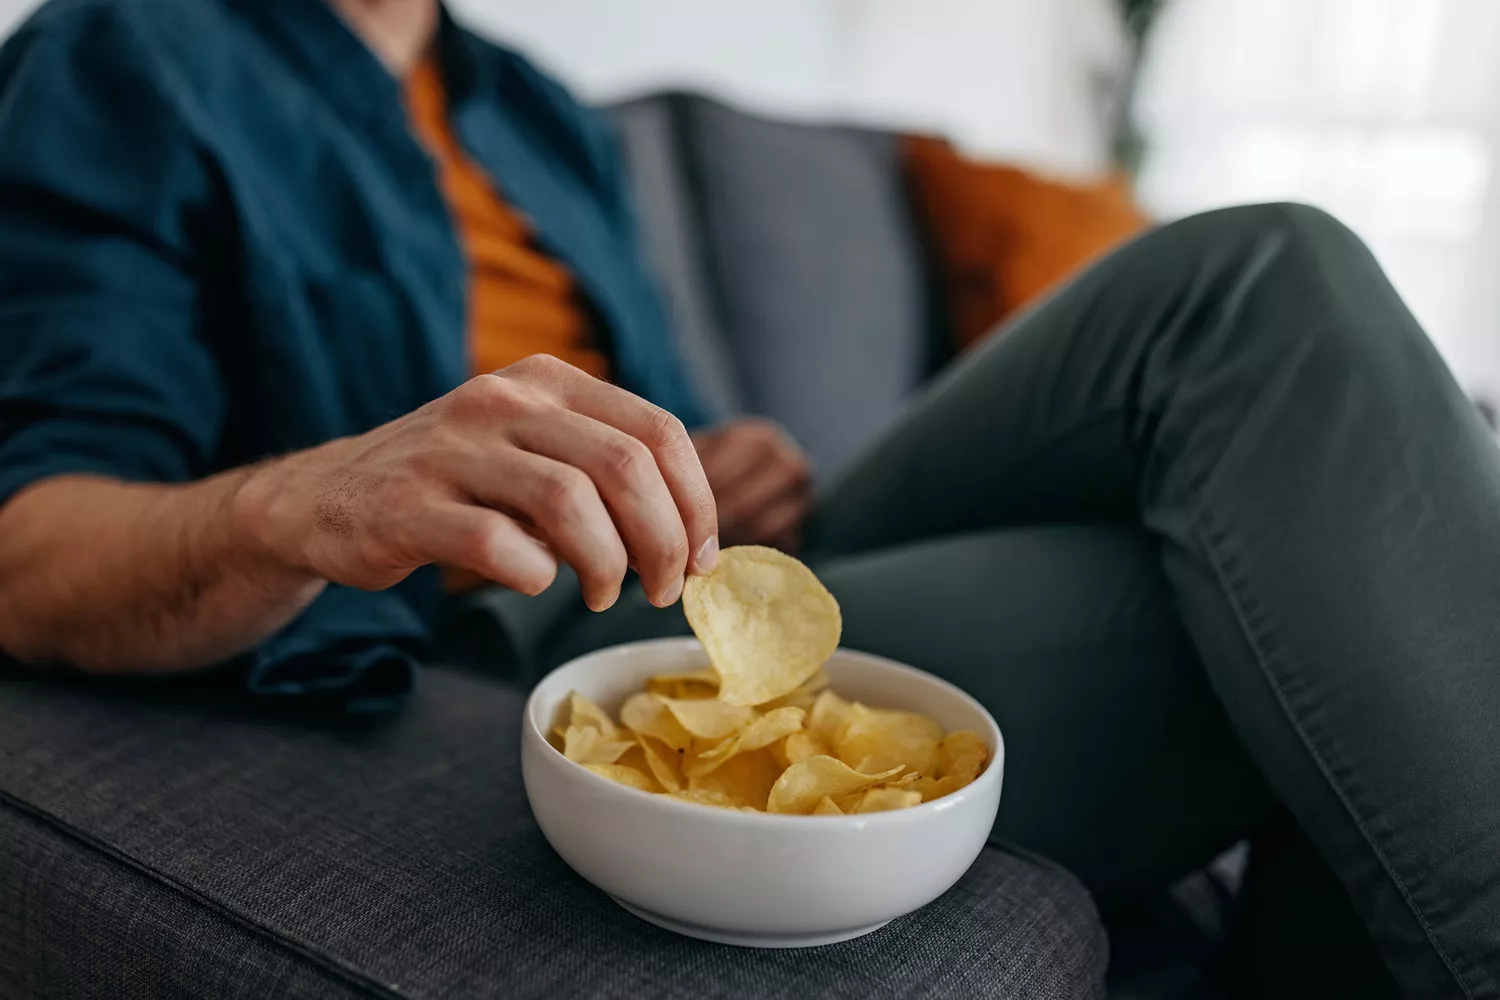 A person eating potato chips at home